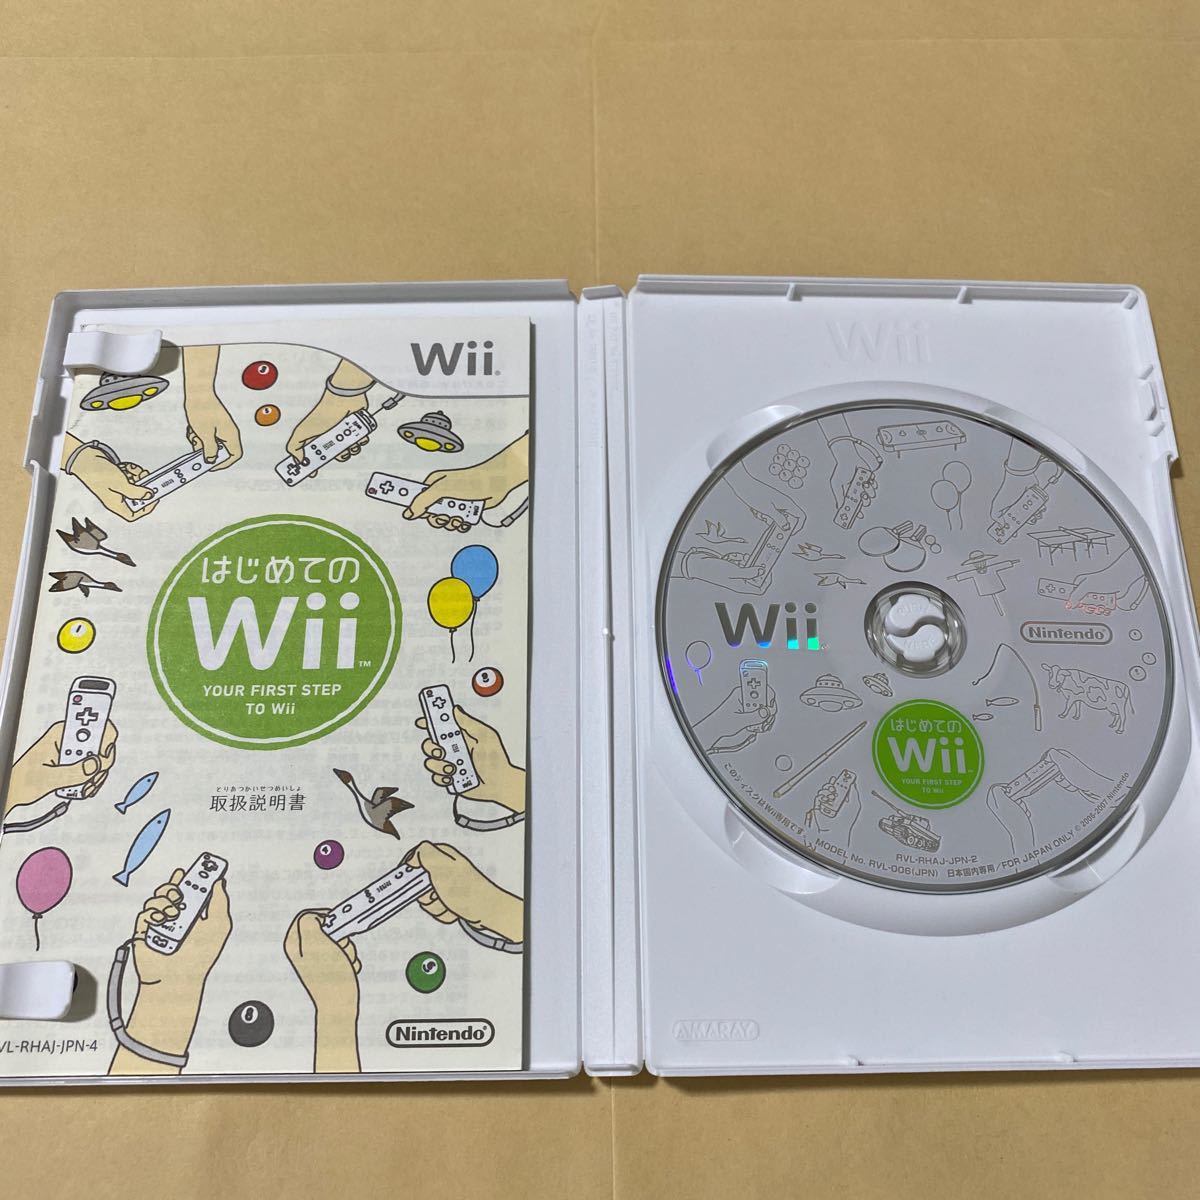 WiiスポーツリゾートとはじめてのWii